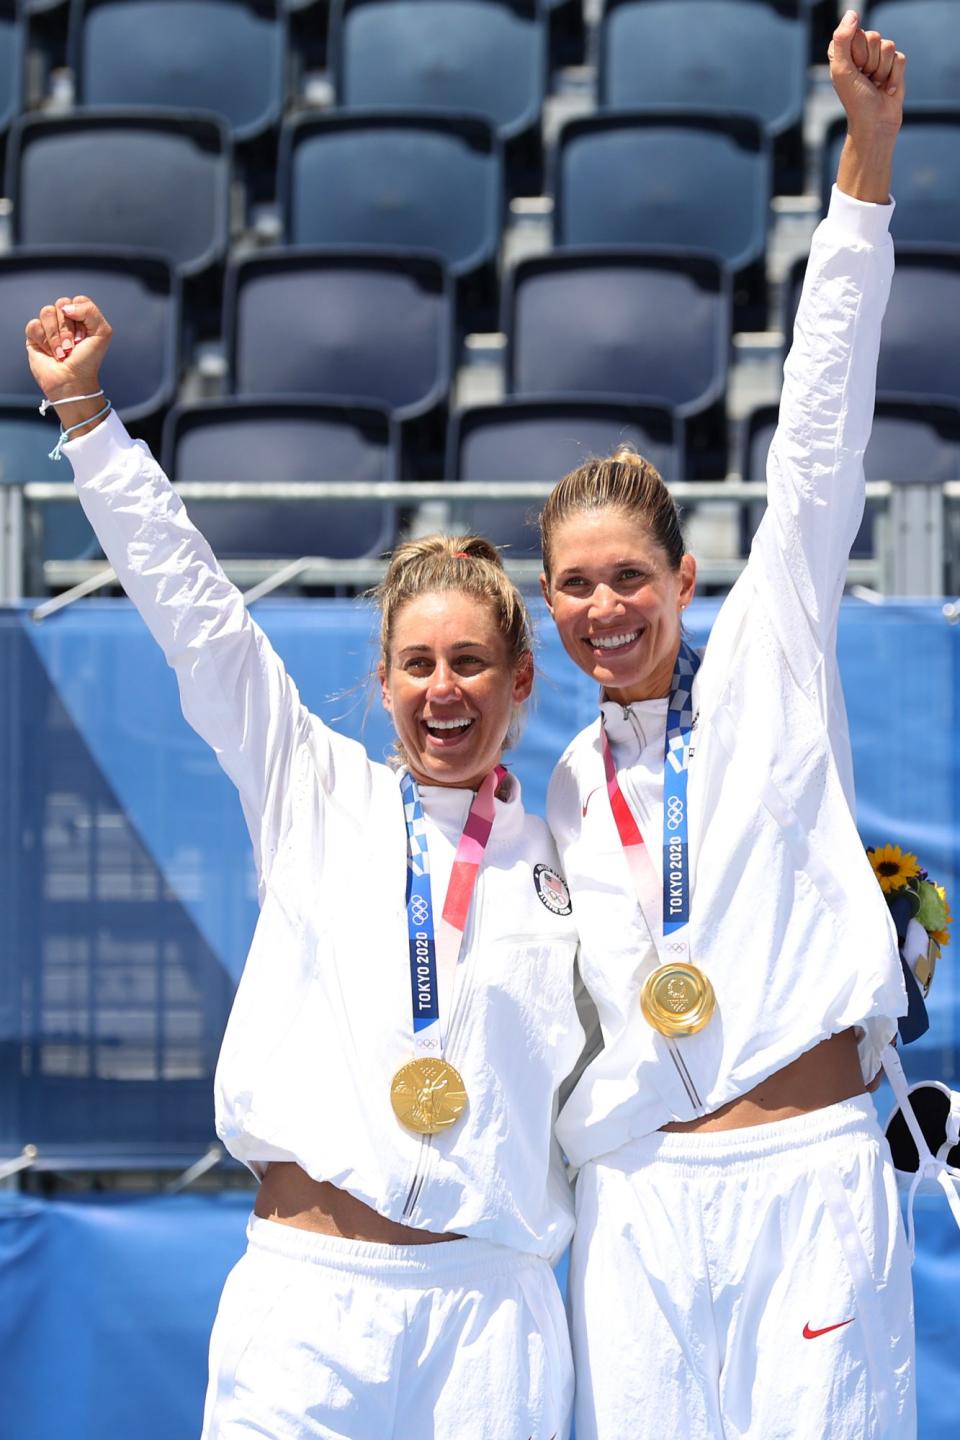 <p>Biography: Klineman is 31 and Ross is 39</p> <p>Event: Women's beach volleyball </p> <p>Quote: Ross: "It means a lot to uphold that tradition. It wasn't easy. So many different countries are putting a lot of resources into their beach volleyball teams and the level is ridiculously high."</p>